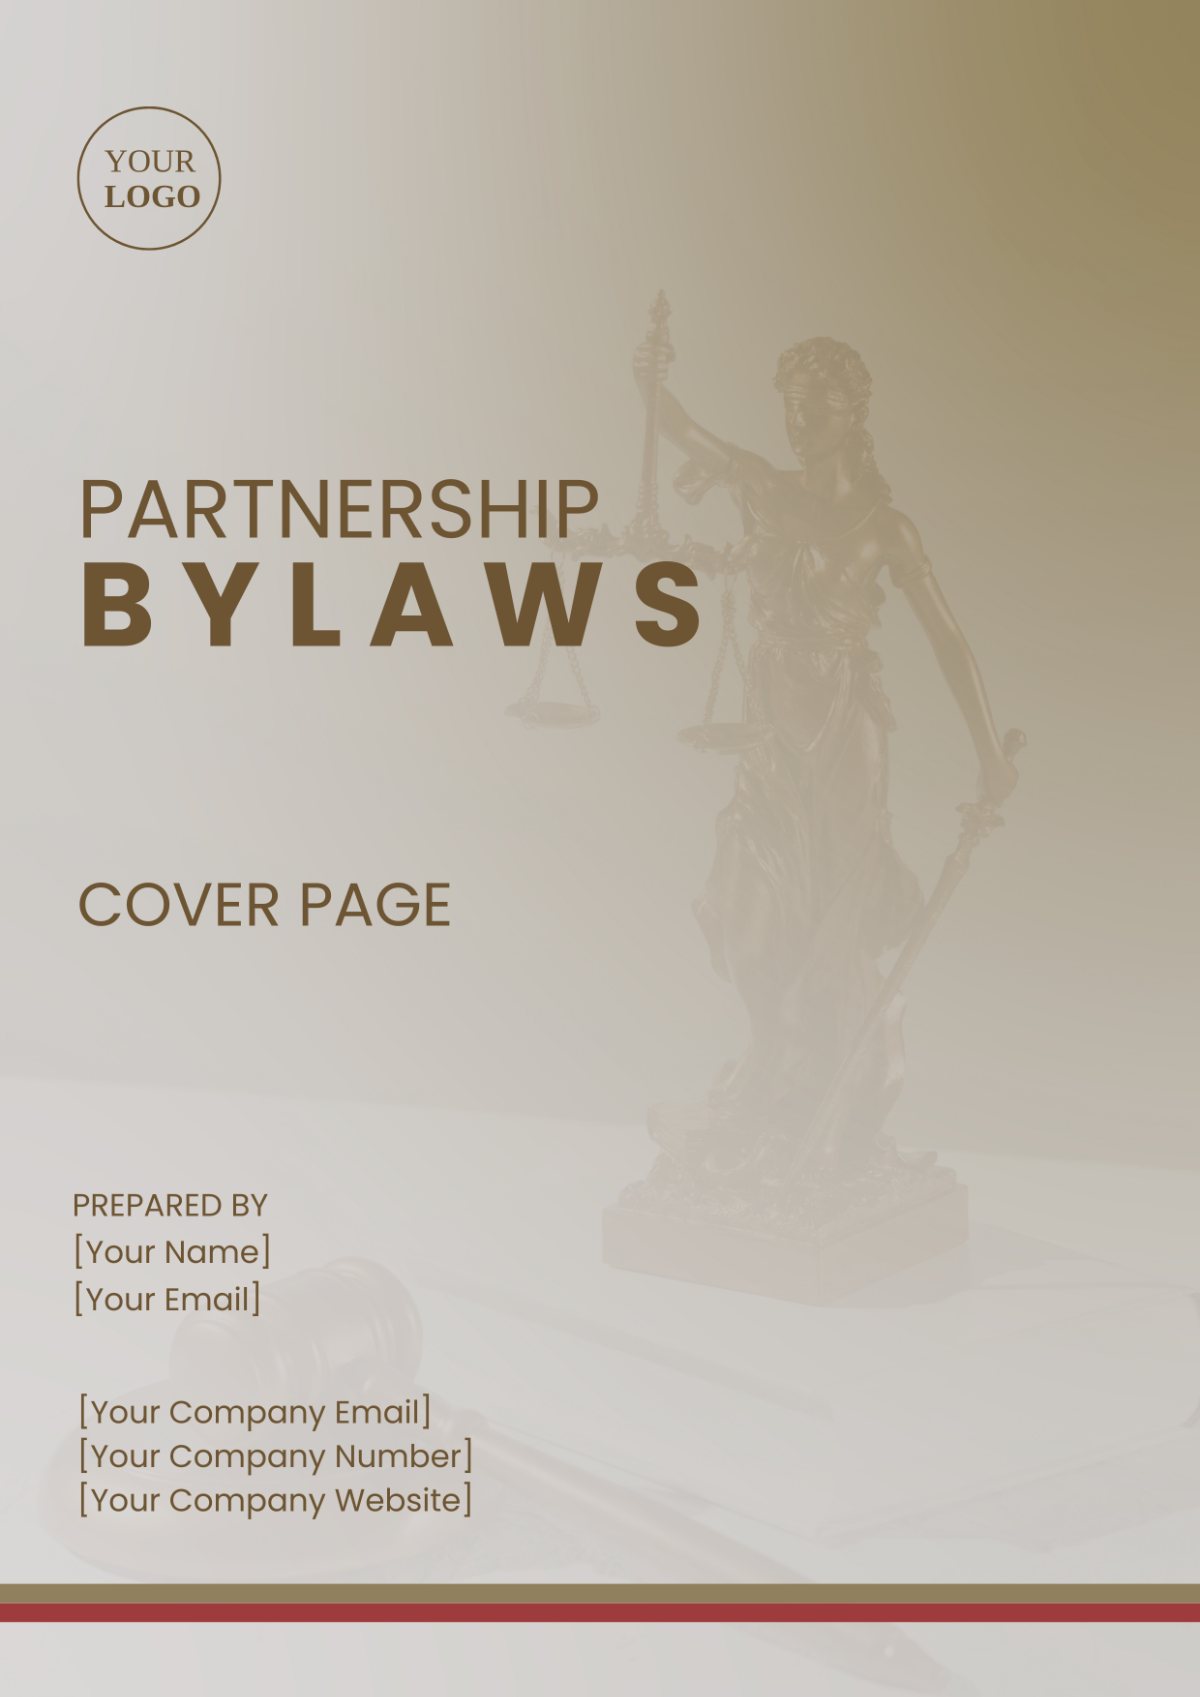 Partnership Bylaws Cover Page